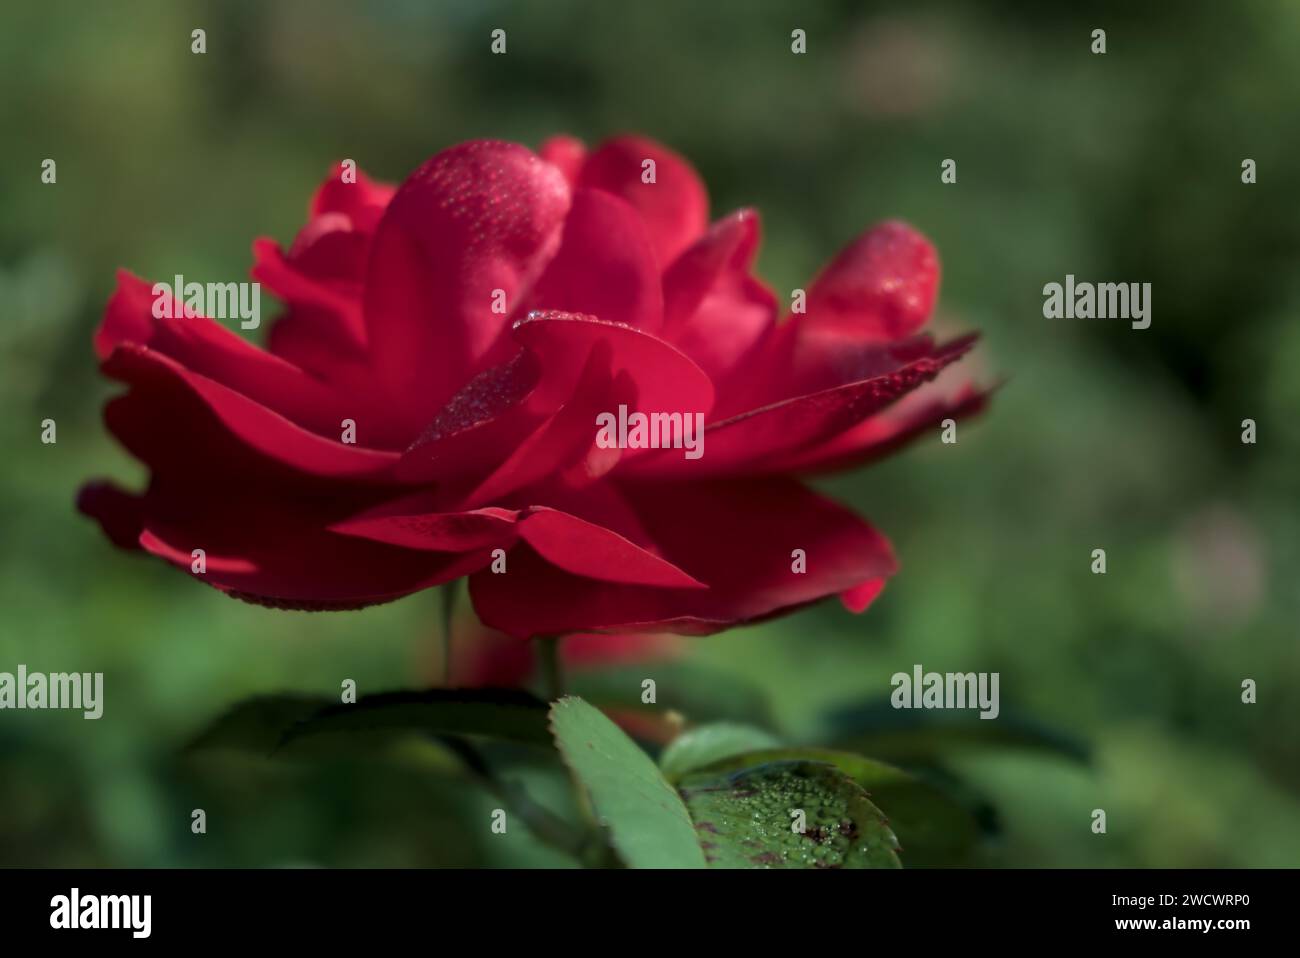 a bright and vivid red rose with dew on its petals, close up shot with blurred green background Stock Photo